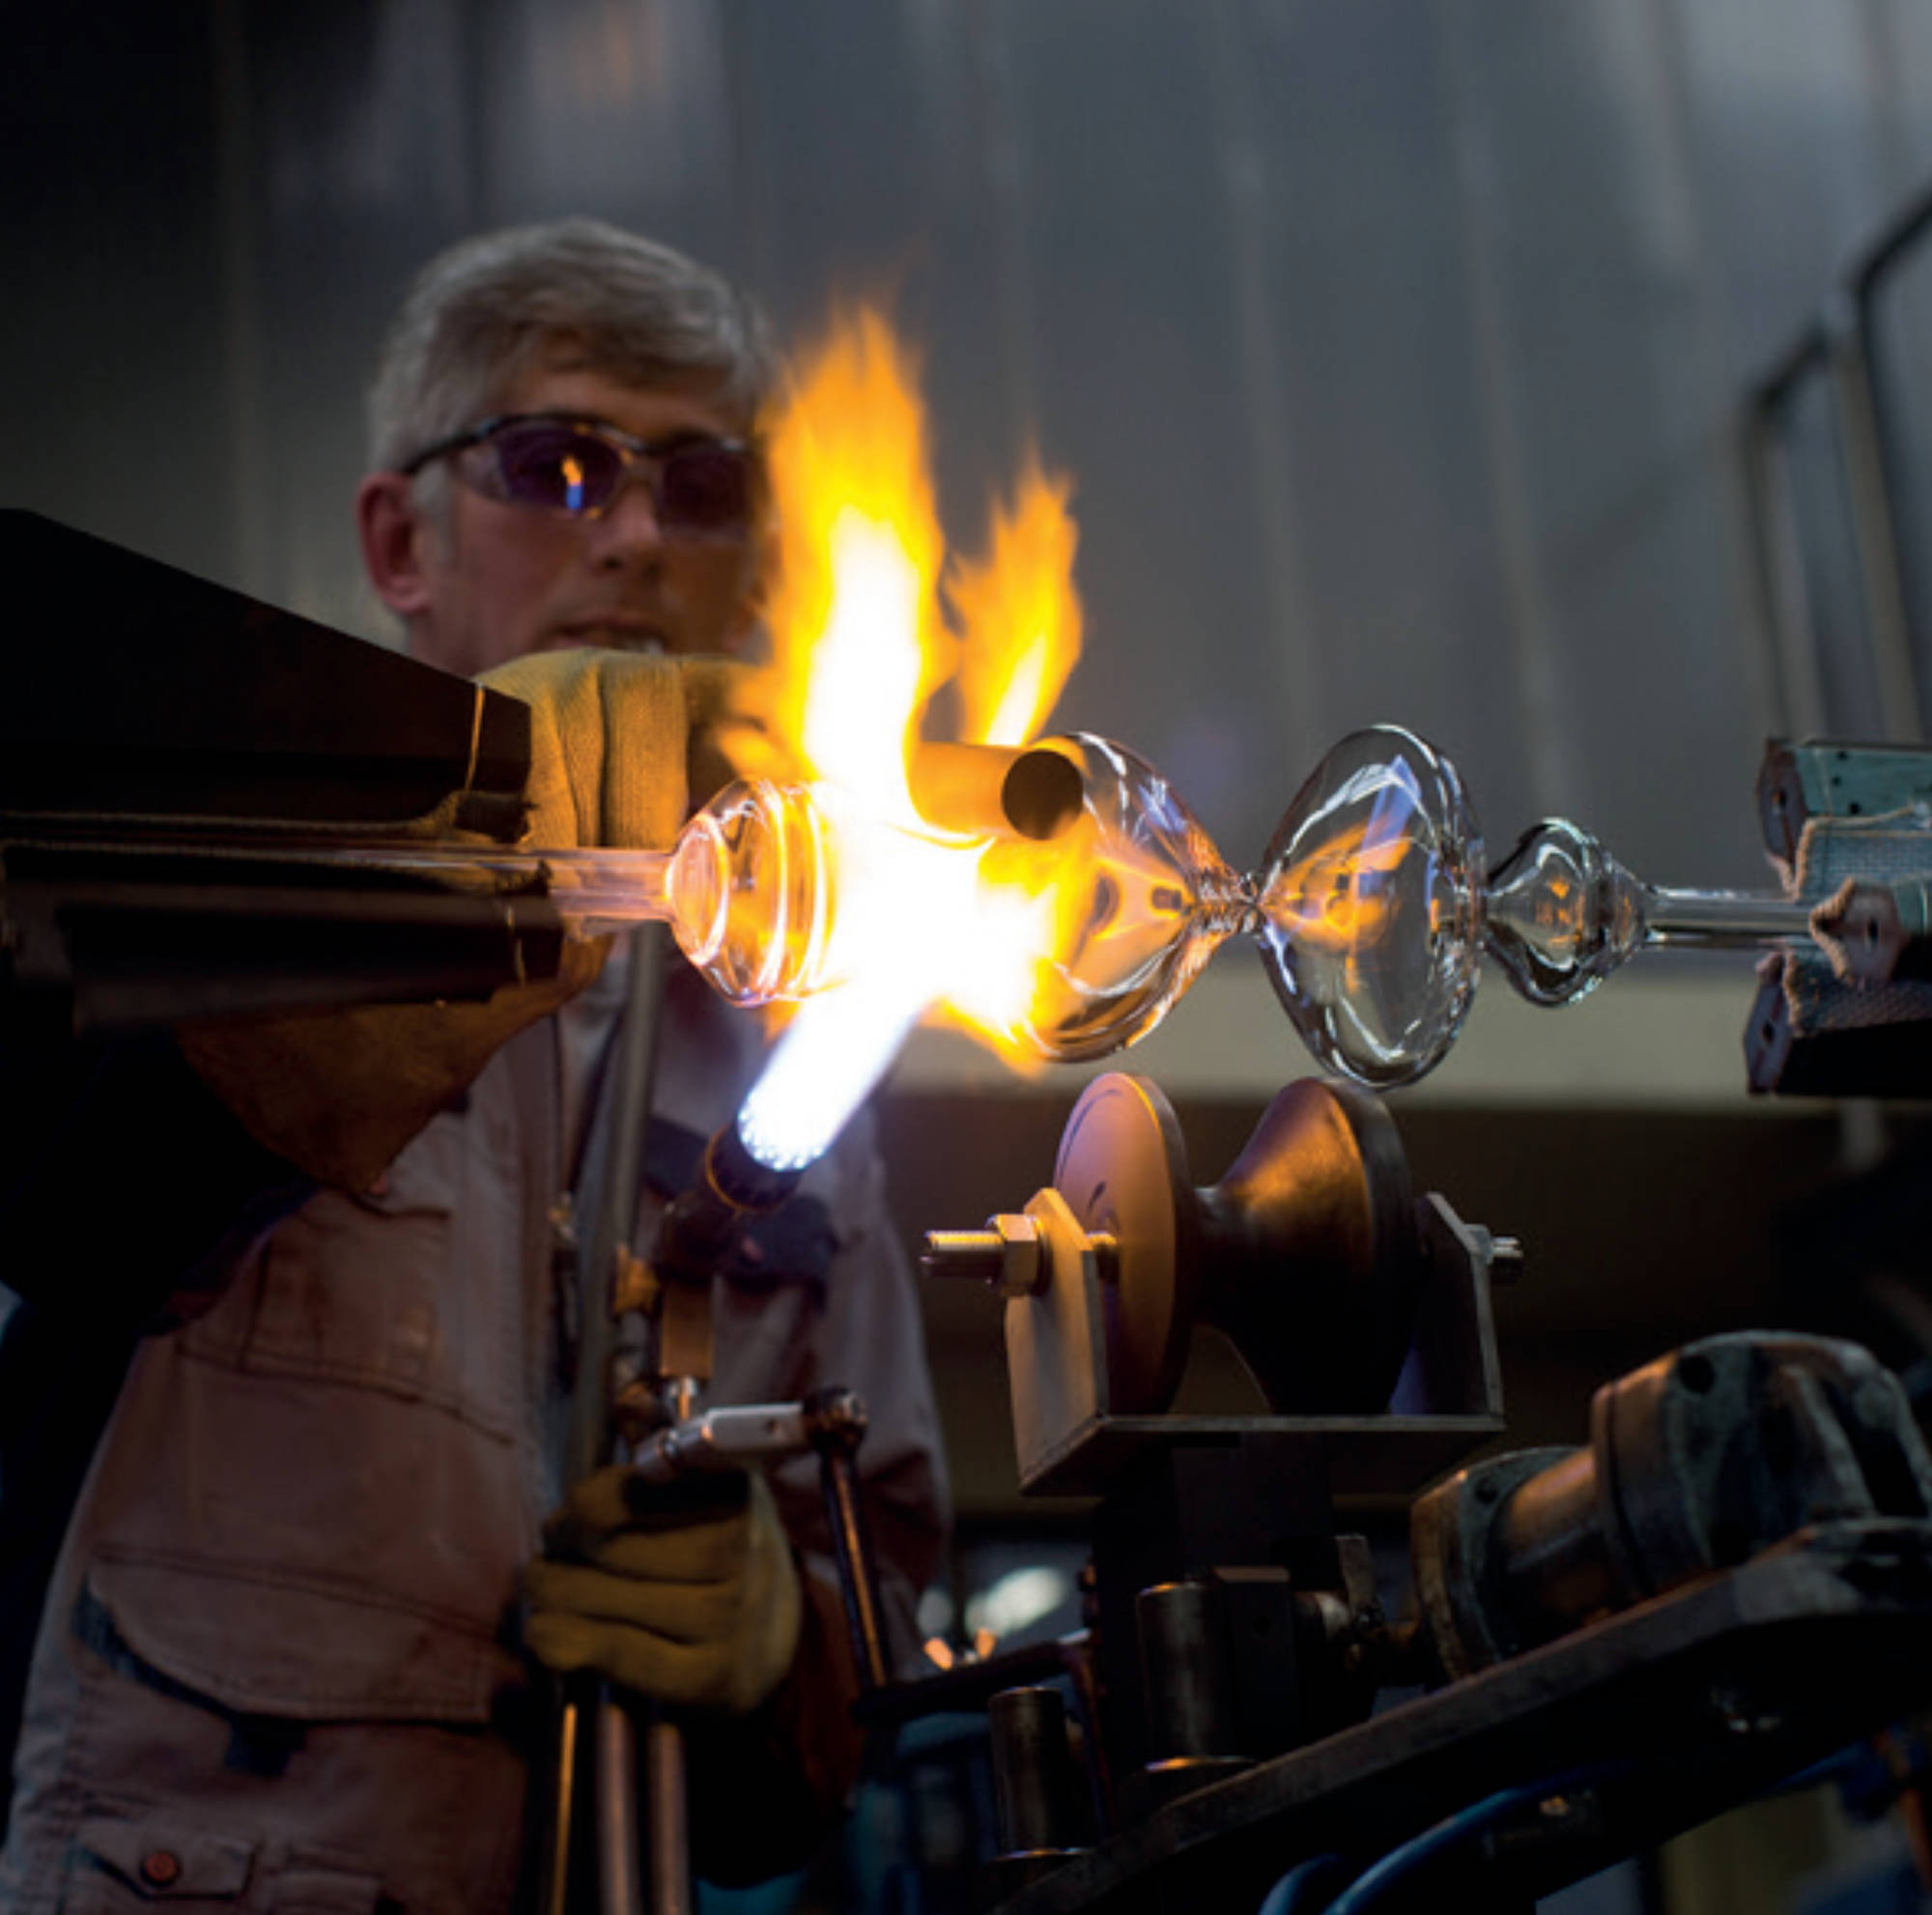 The master glassblower at work.